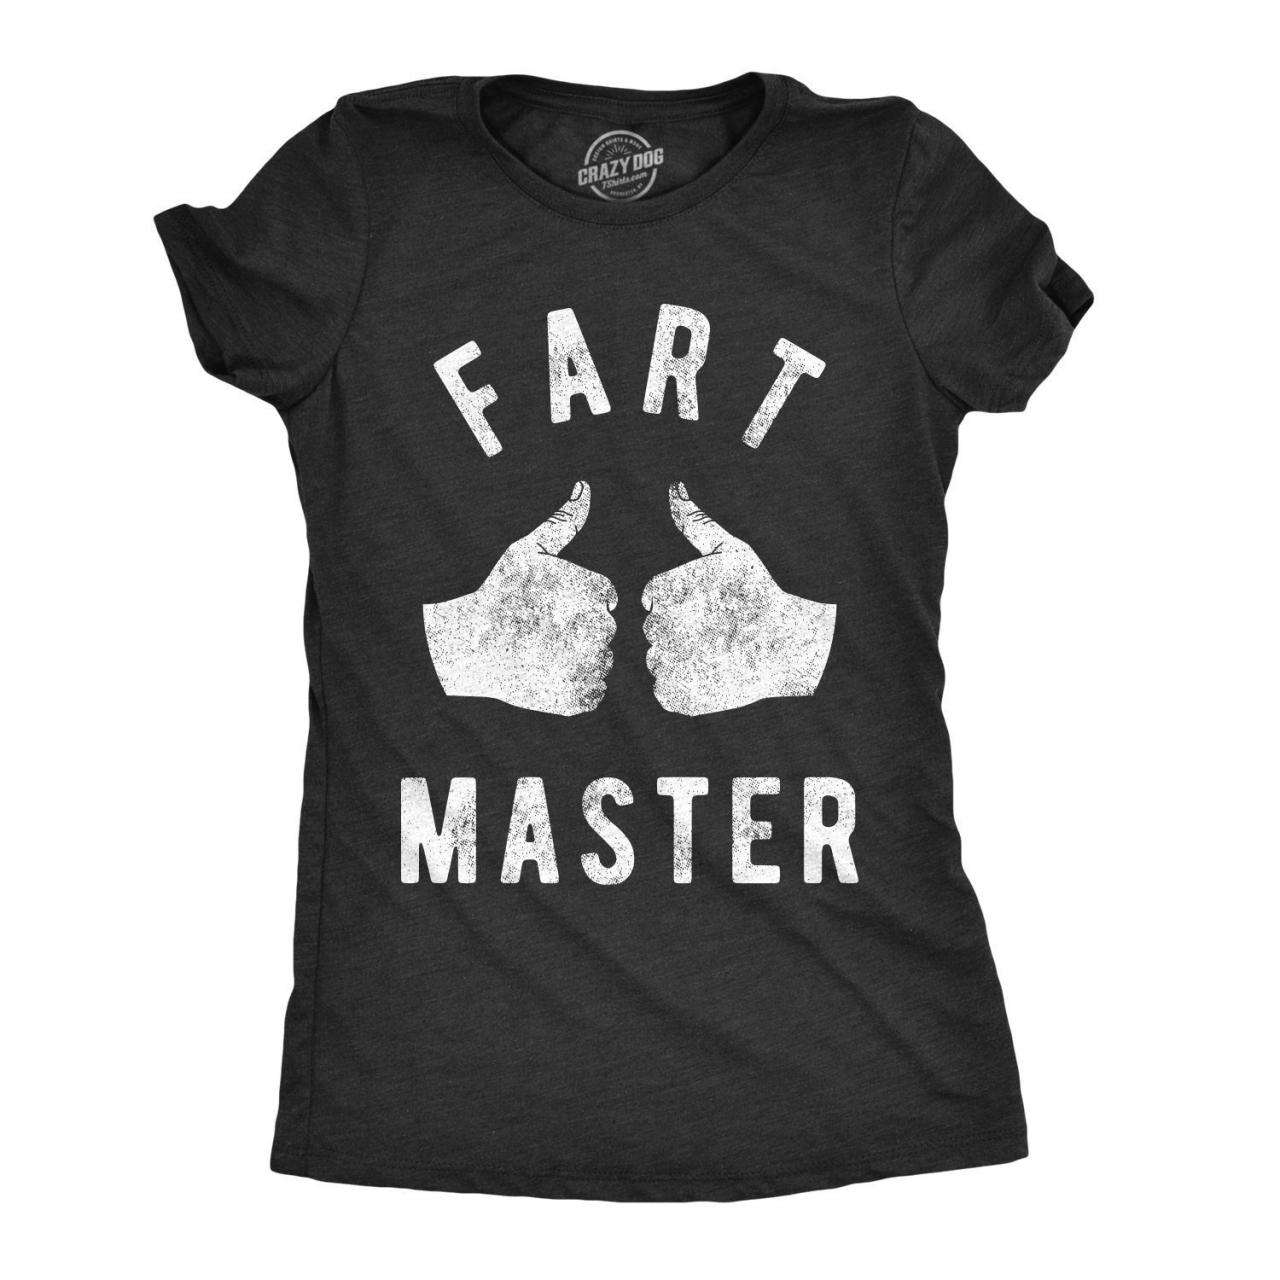 T Shirts, Humor Shirt, Embarrassing With Sayings, Offensive T Shirts, Fart on Luulla